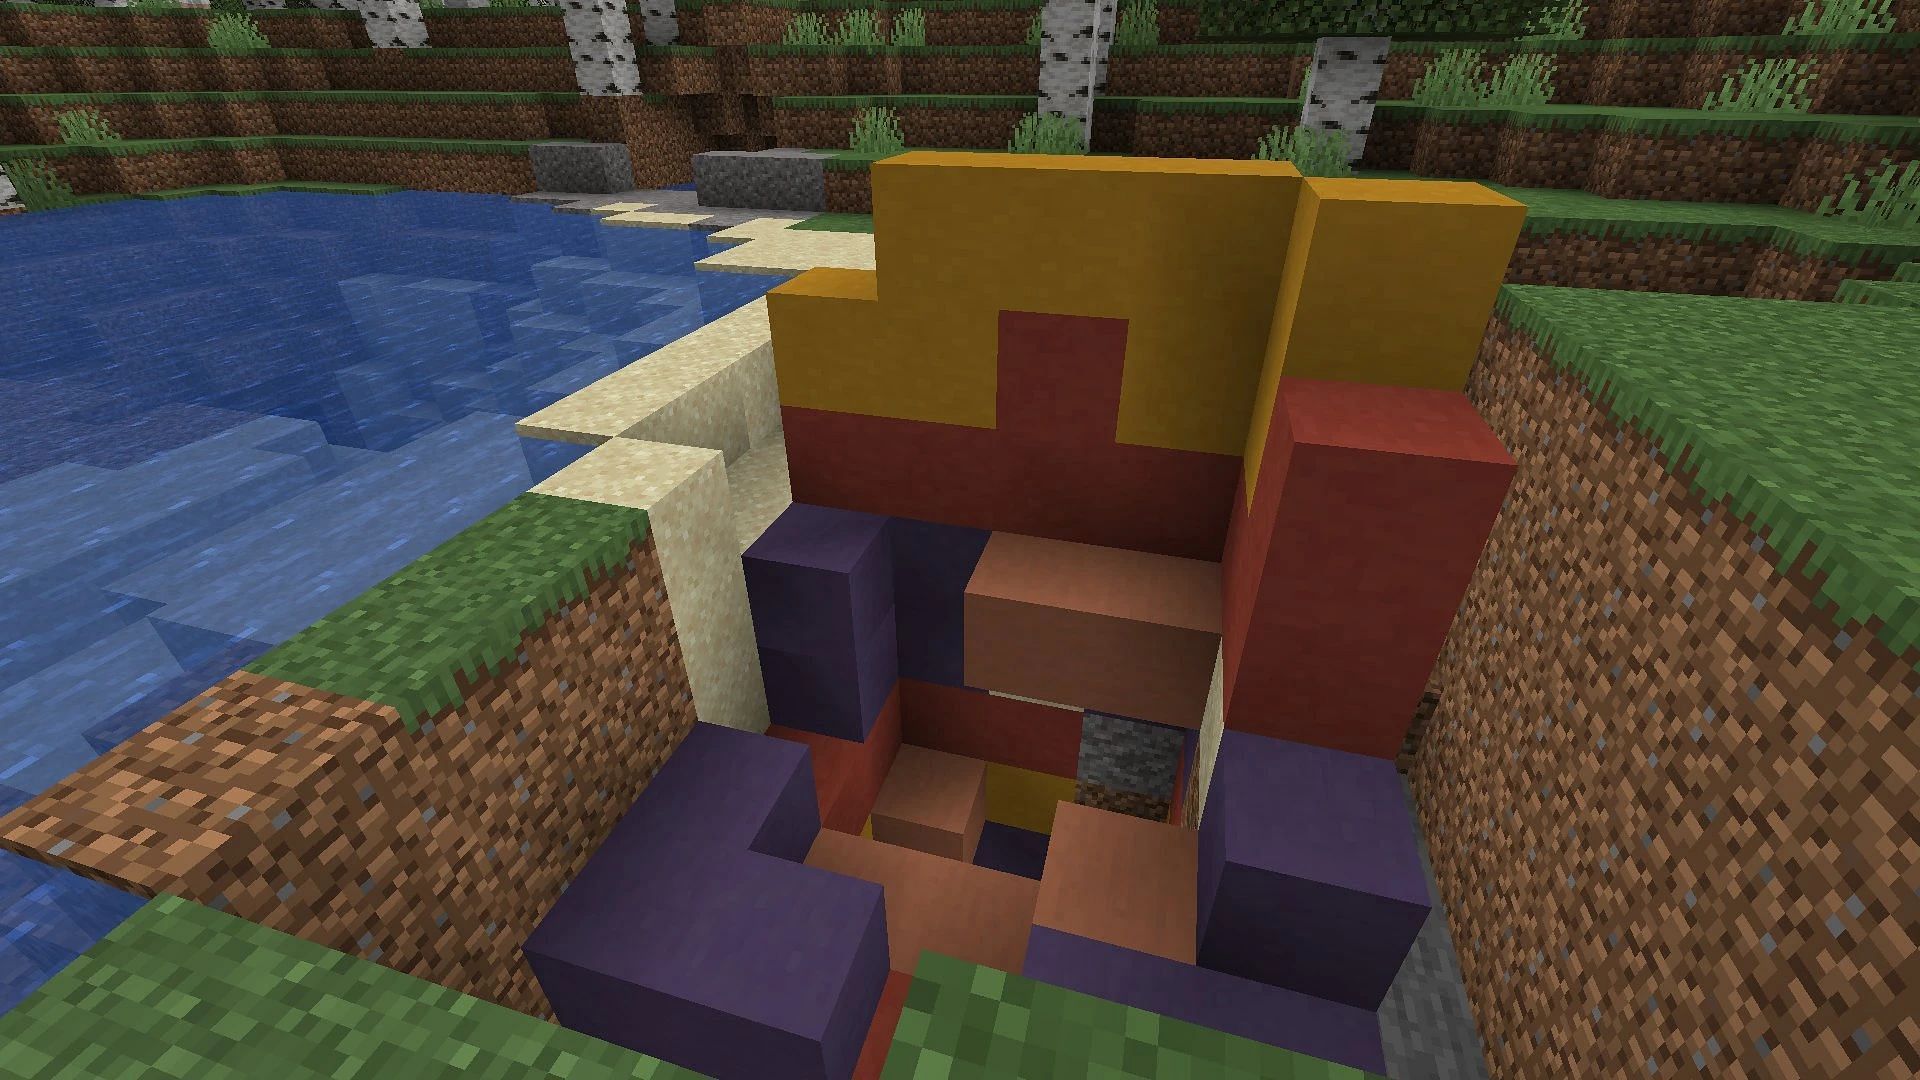 Trail ruins is a brand new structure for the archeology feature in Minecraft 1.20 snapshot 23w12a. (Image via Mojang)